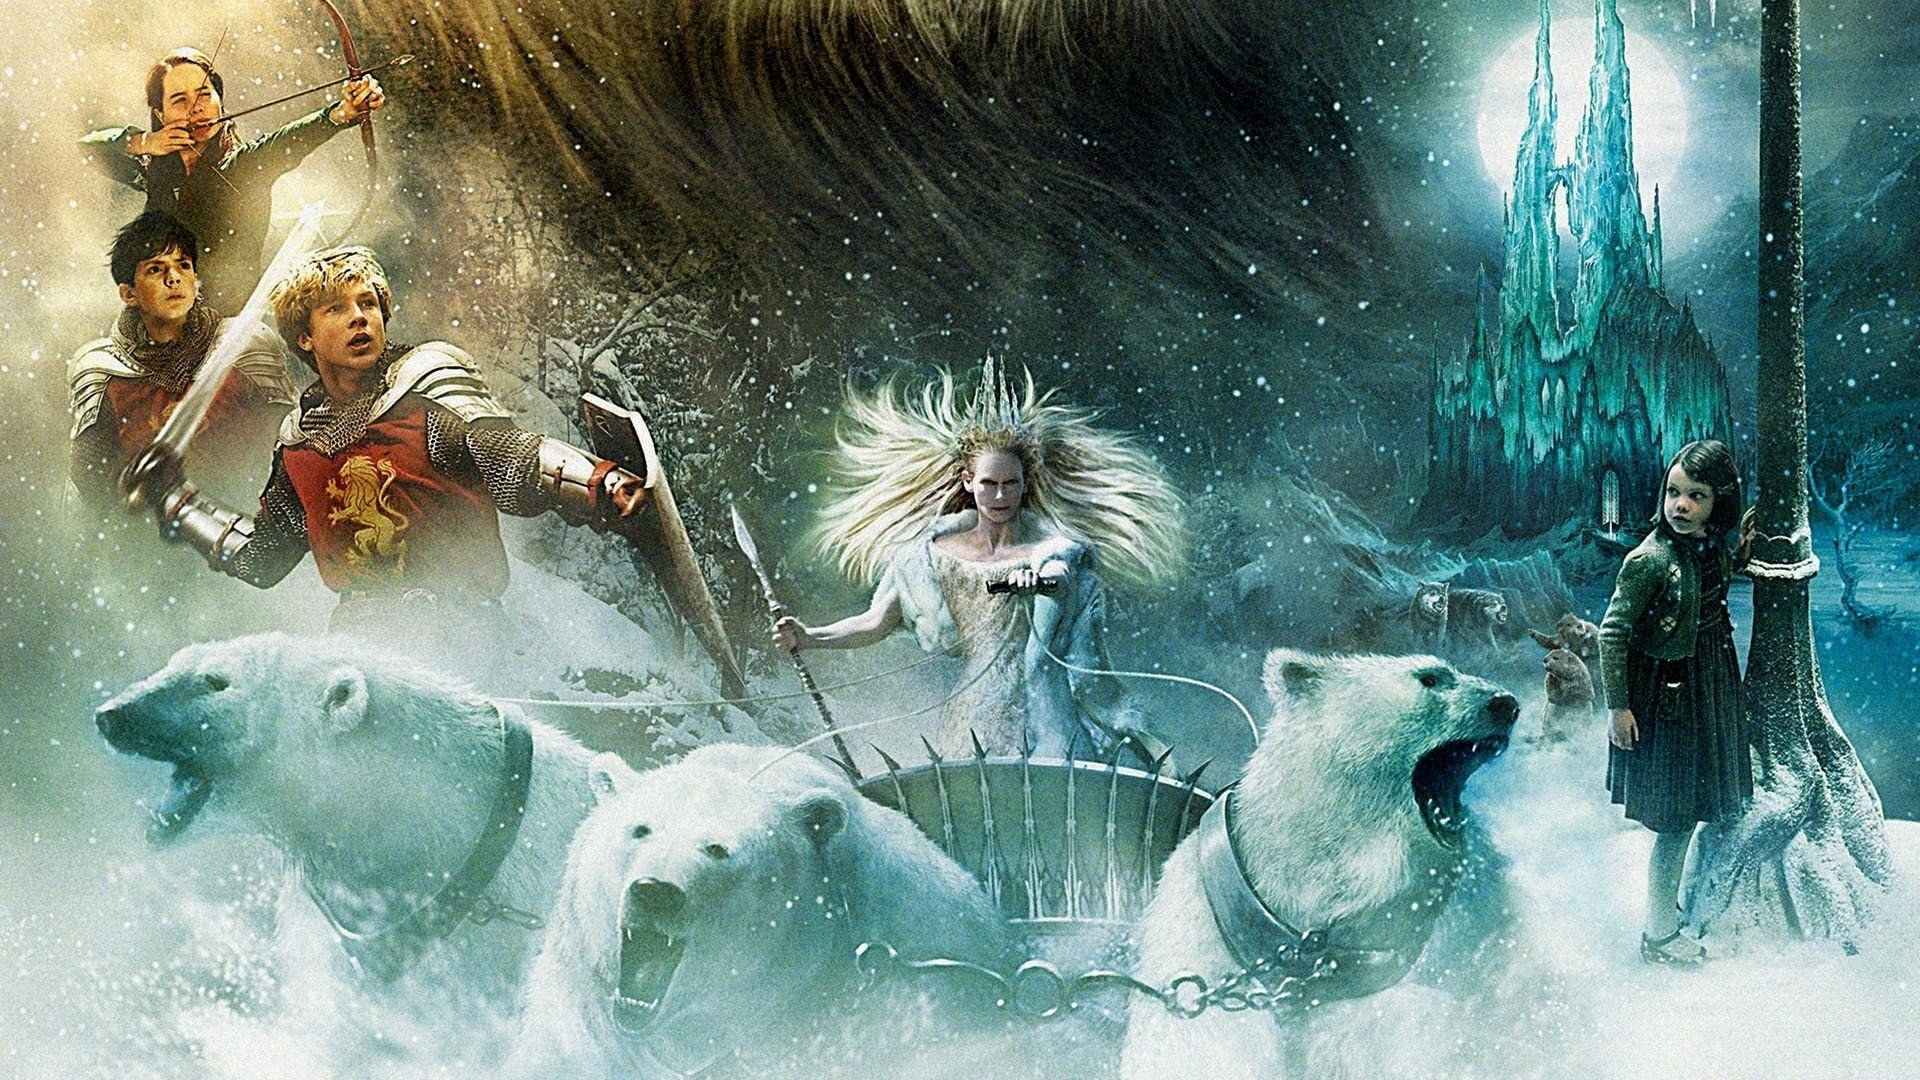 Lion, Witch and wardrobe, HD wallpaper, Background image, 1920x1080 Full HD Desktop